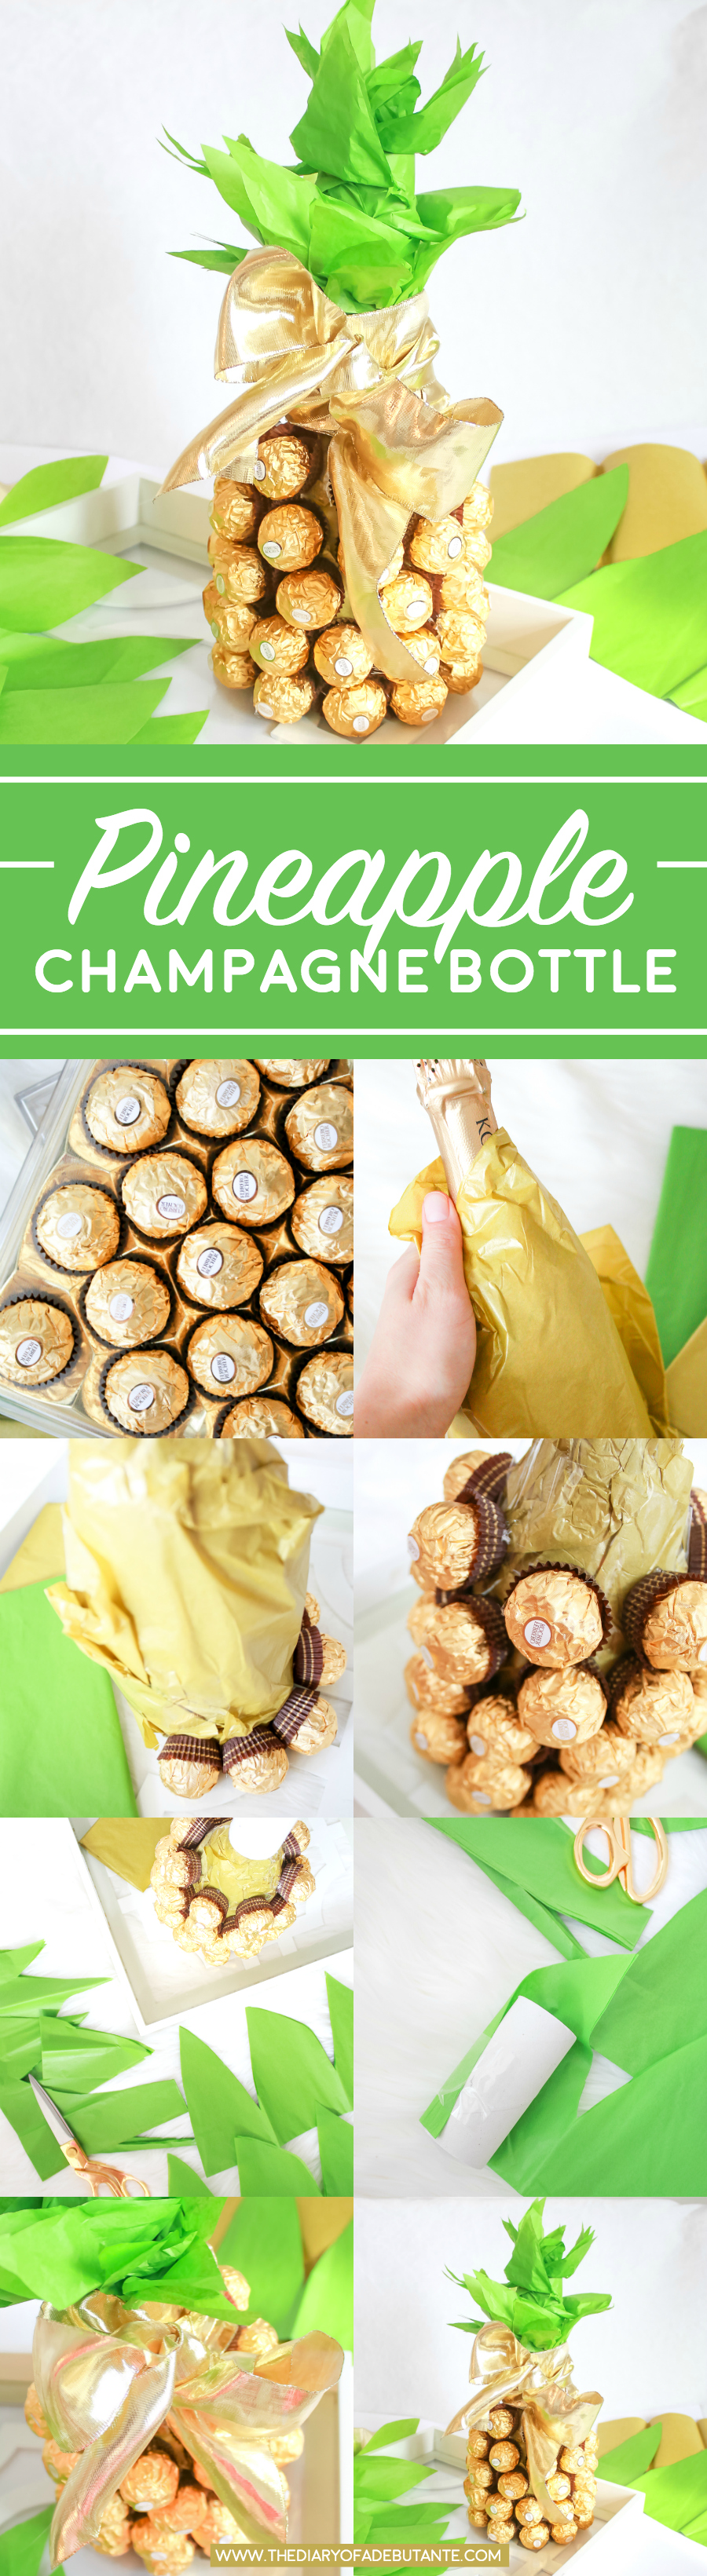 Looking for DIY housewarming gifts? Look no further than this adorable chocolate-covered champagne pineapple by southern blogger Stephanie Ziajka from Diary of a Debutante